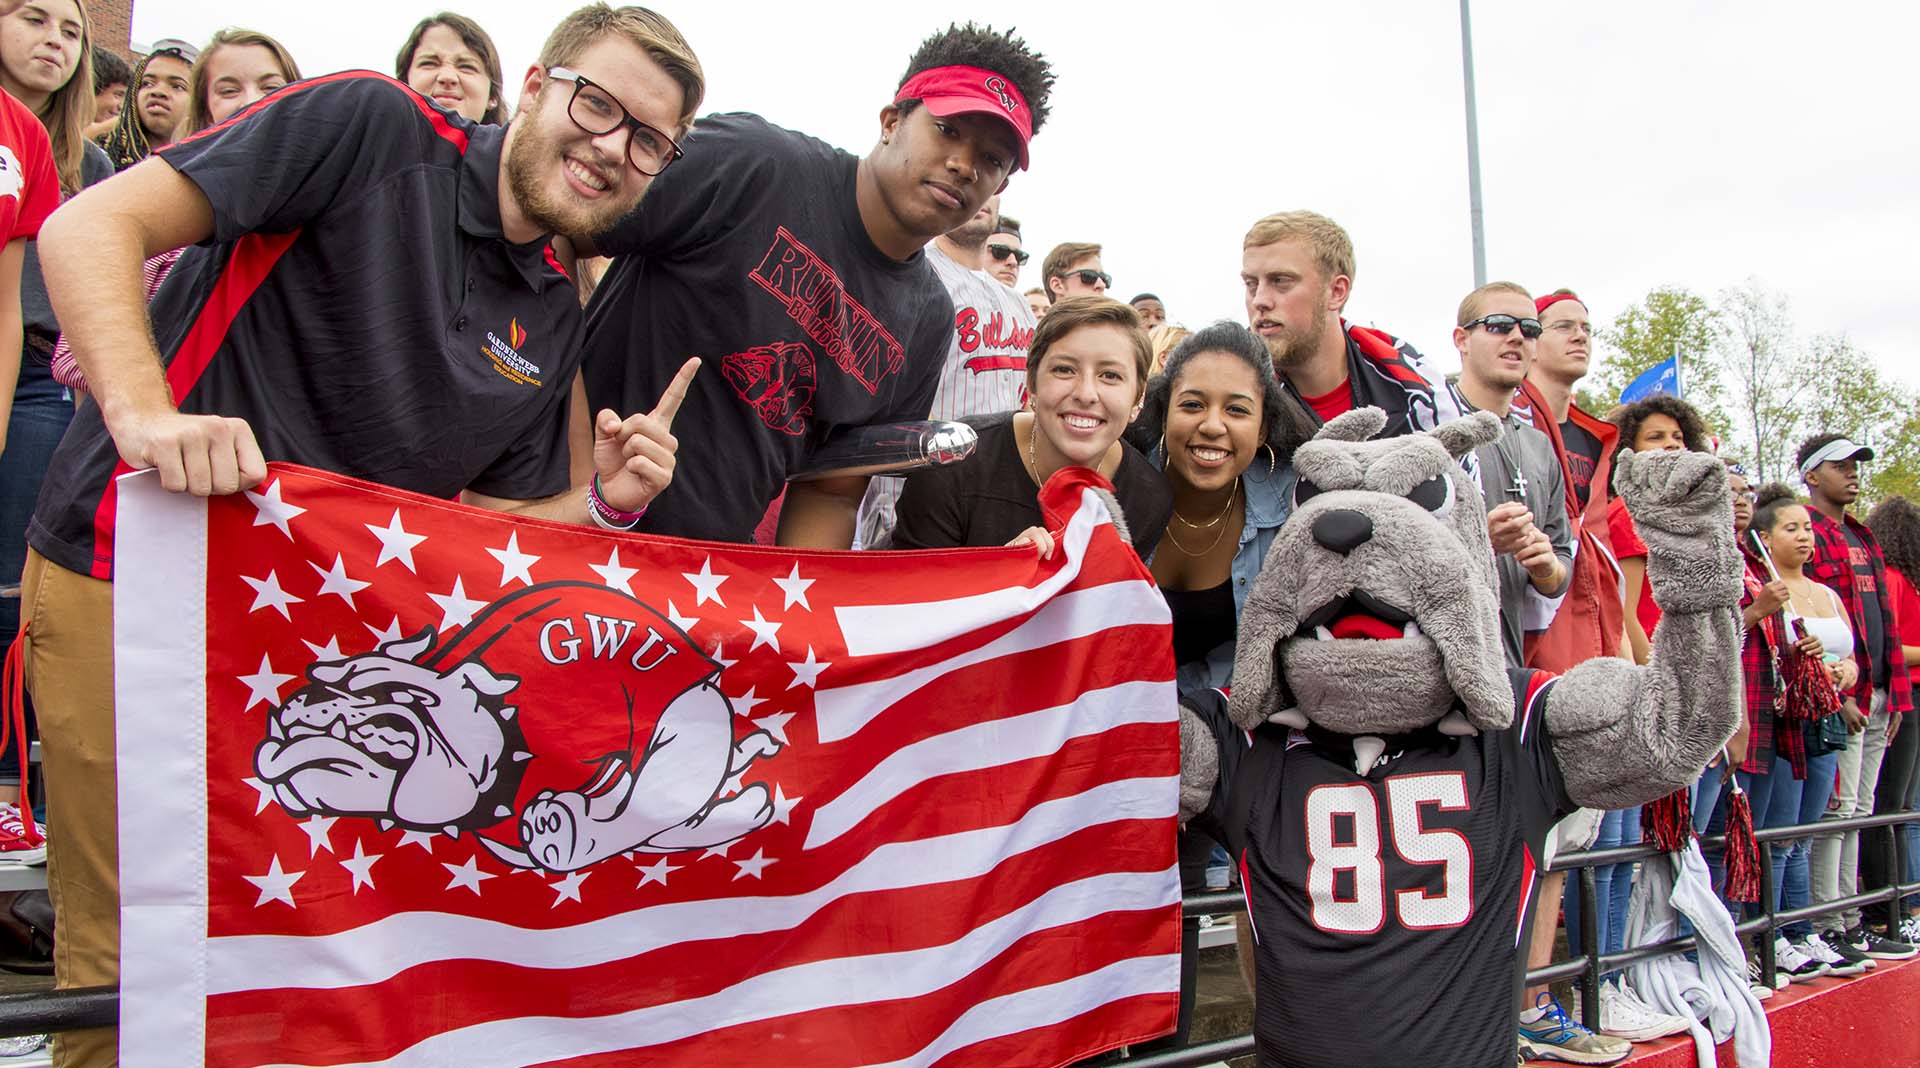 GWU students with mascot at homecoming game holding GWU flag